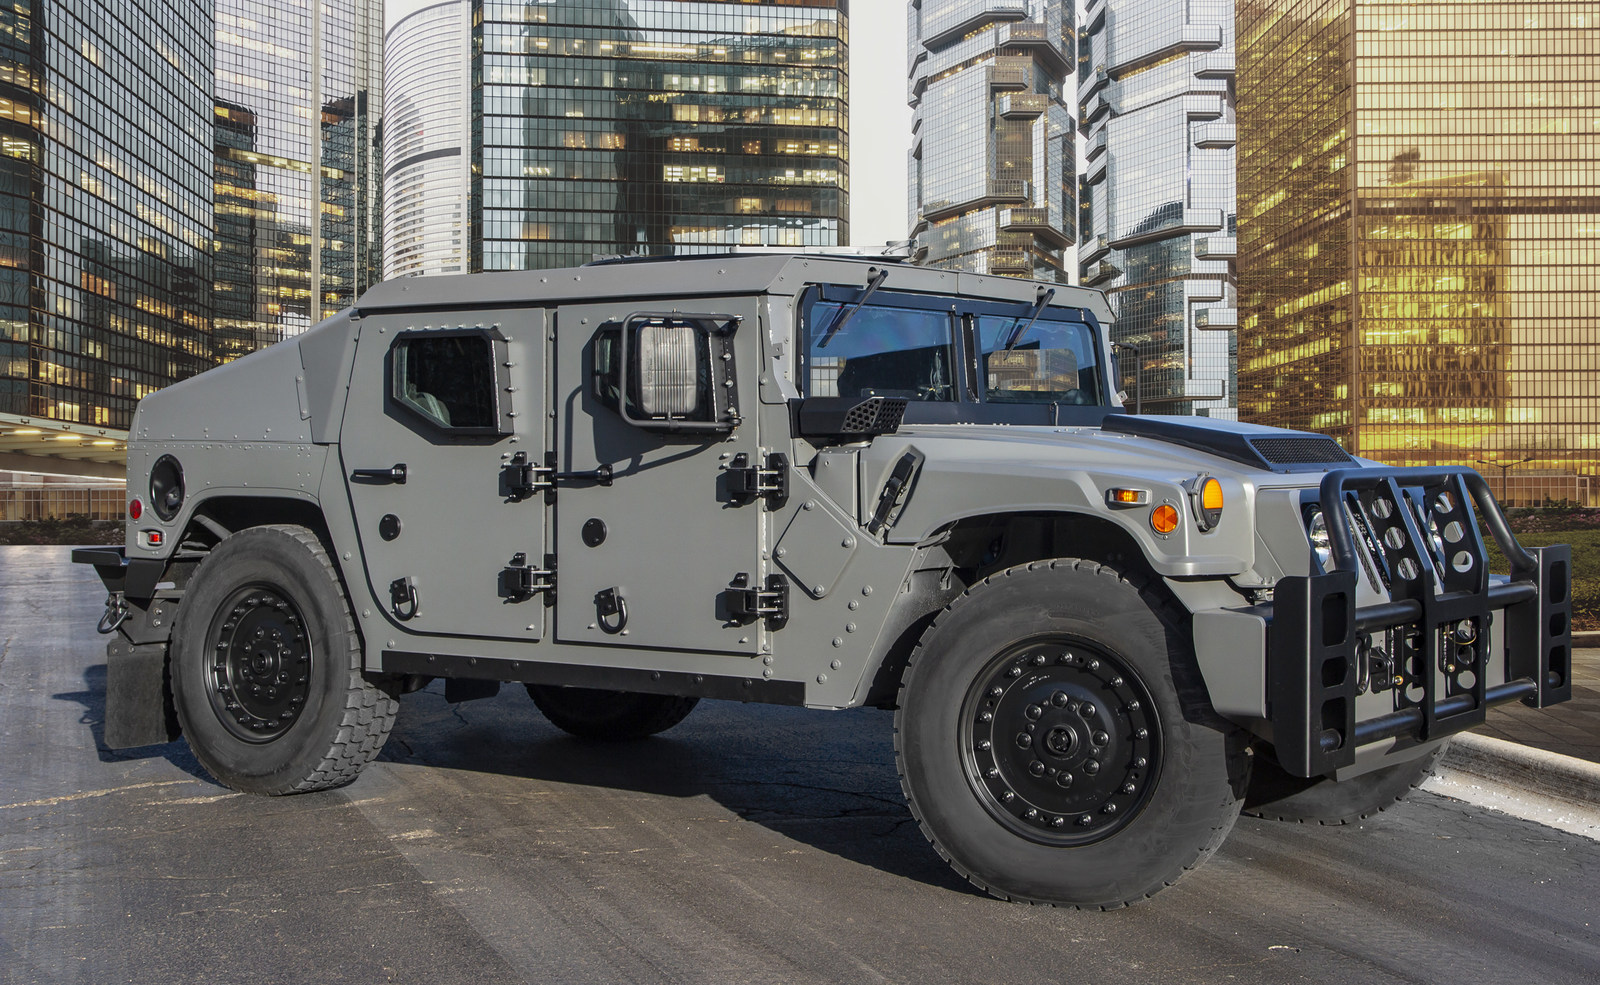 AM General's new light tactical vehicle, NXT 360